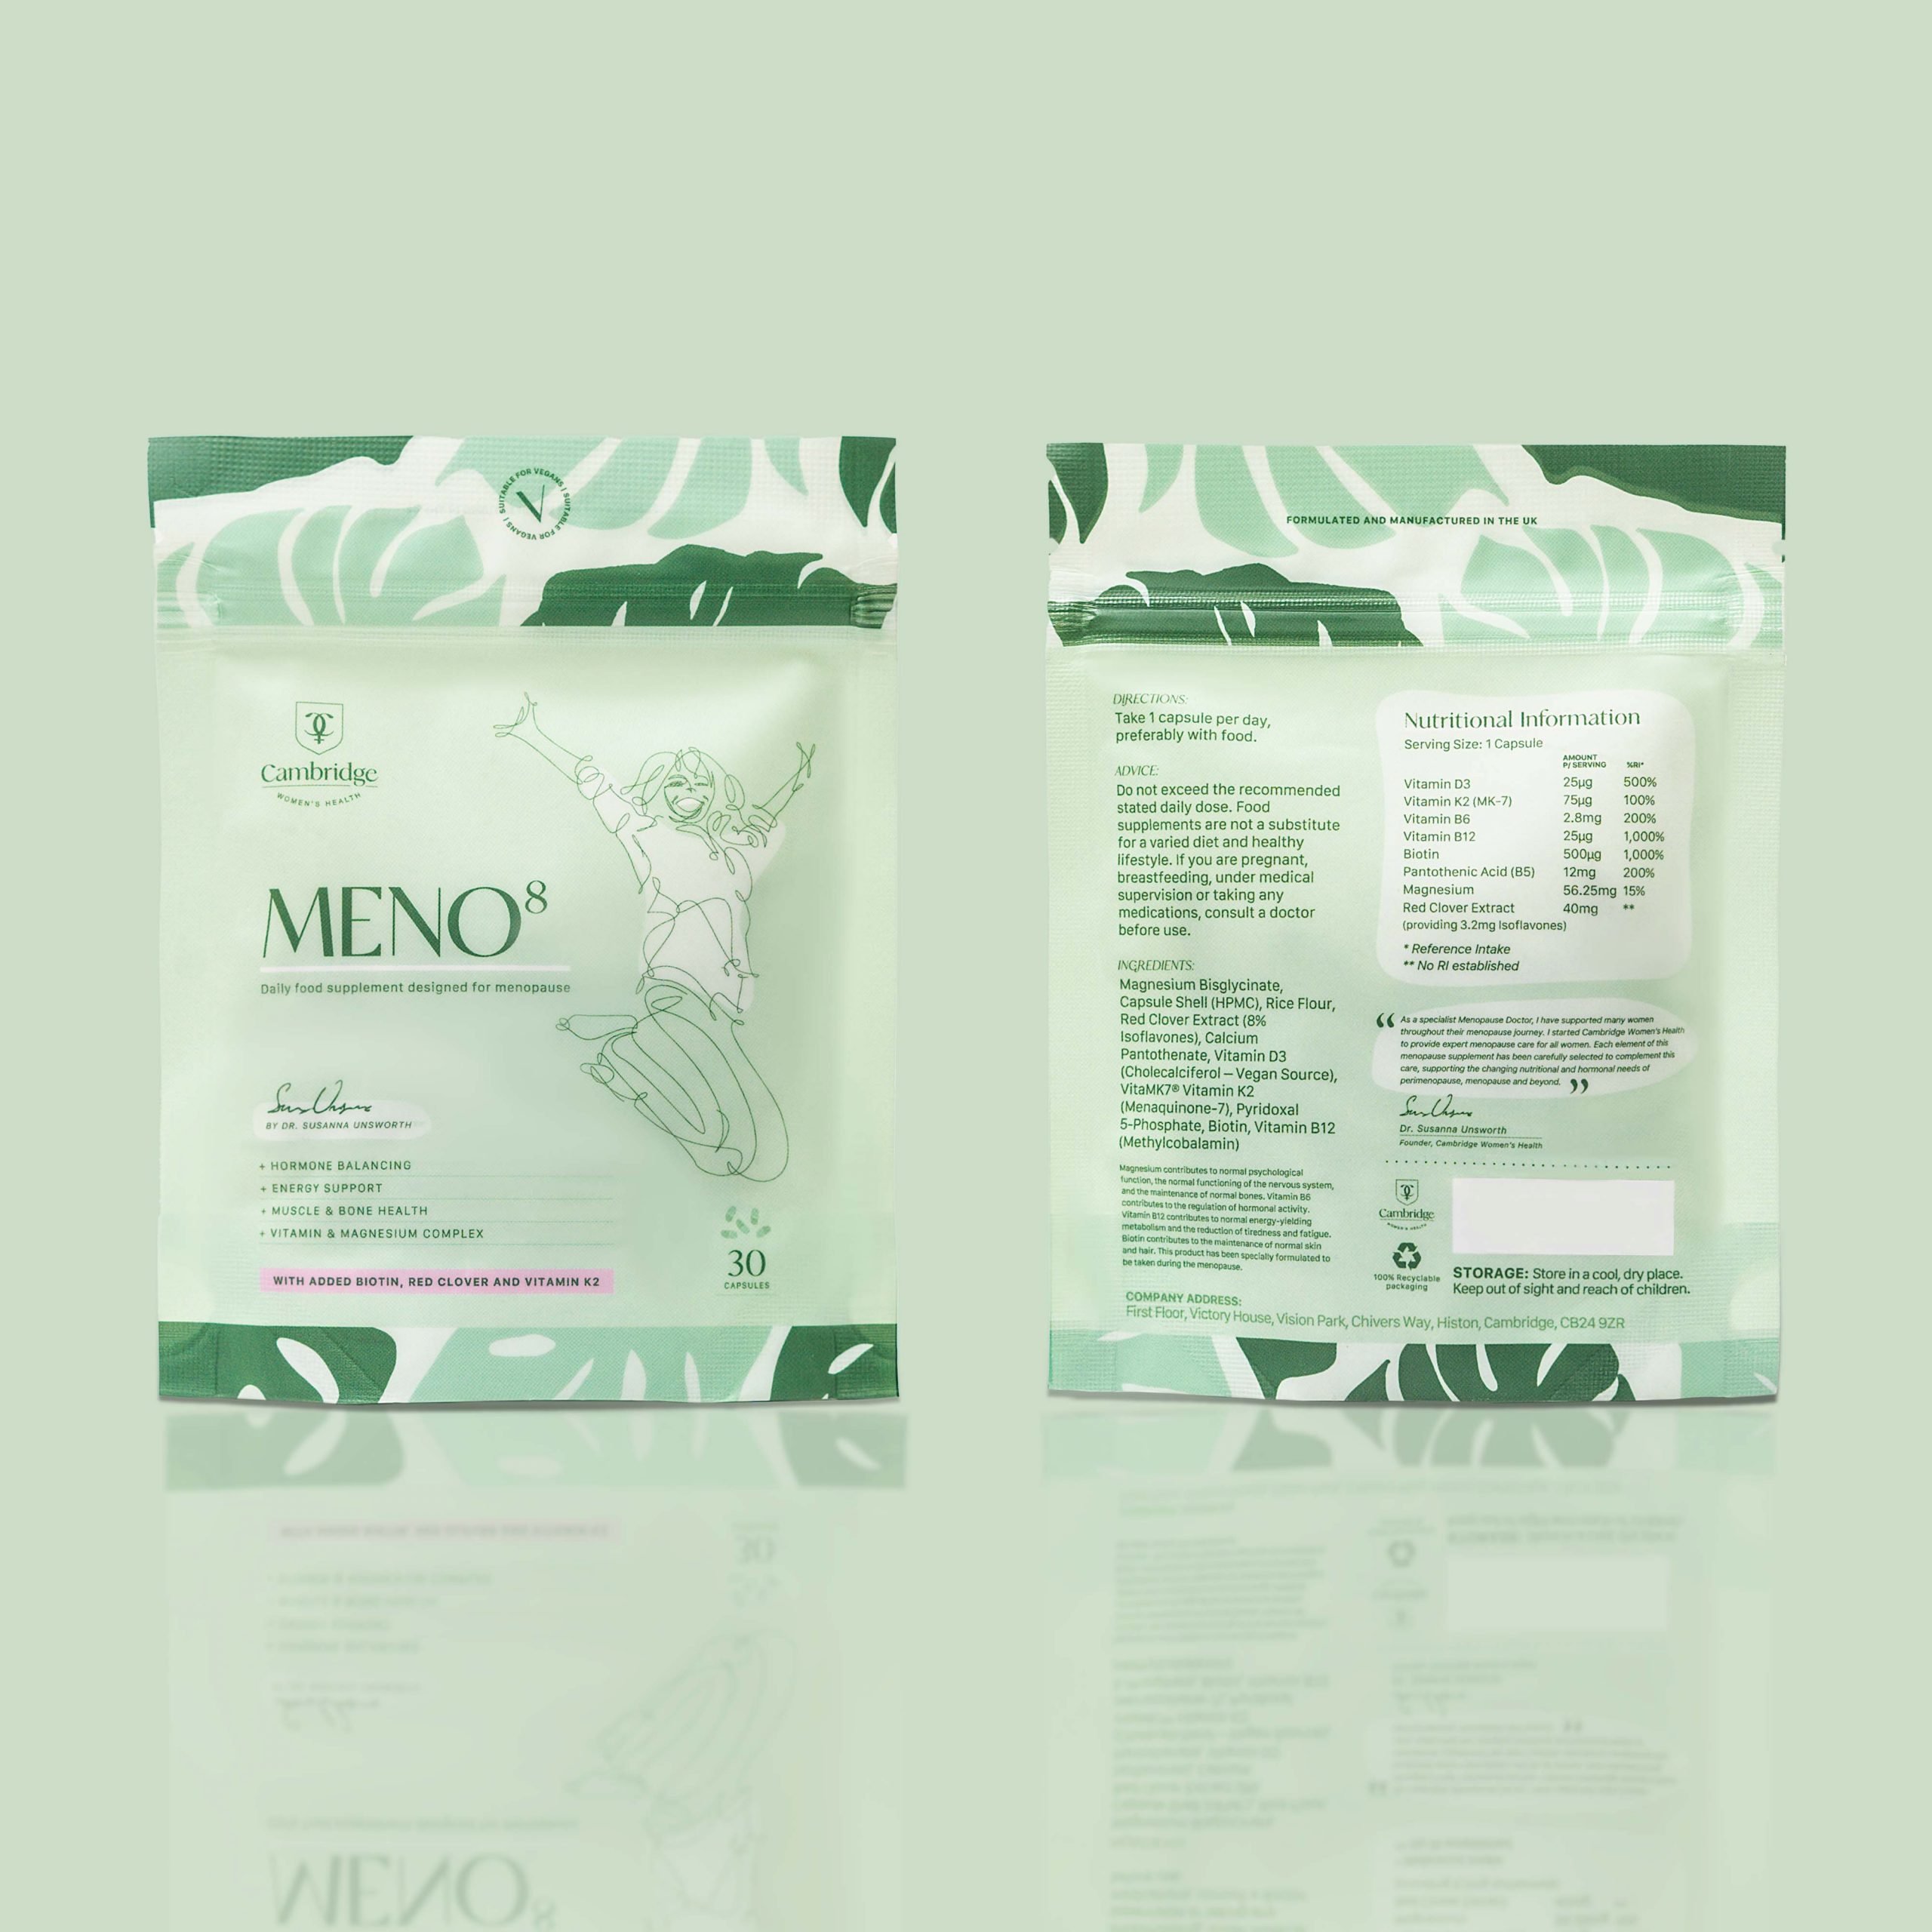 A picture of the front and back of the Meno8 supplement packet on a light green surface.